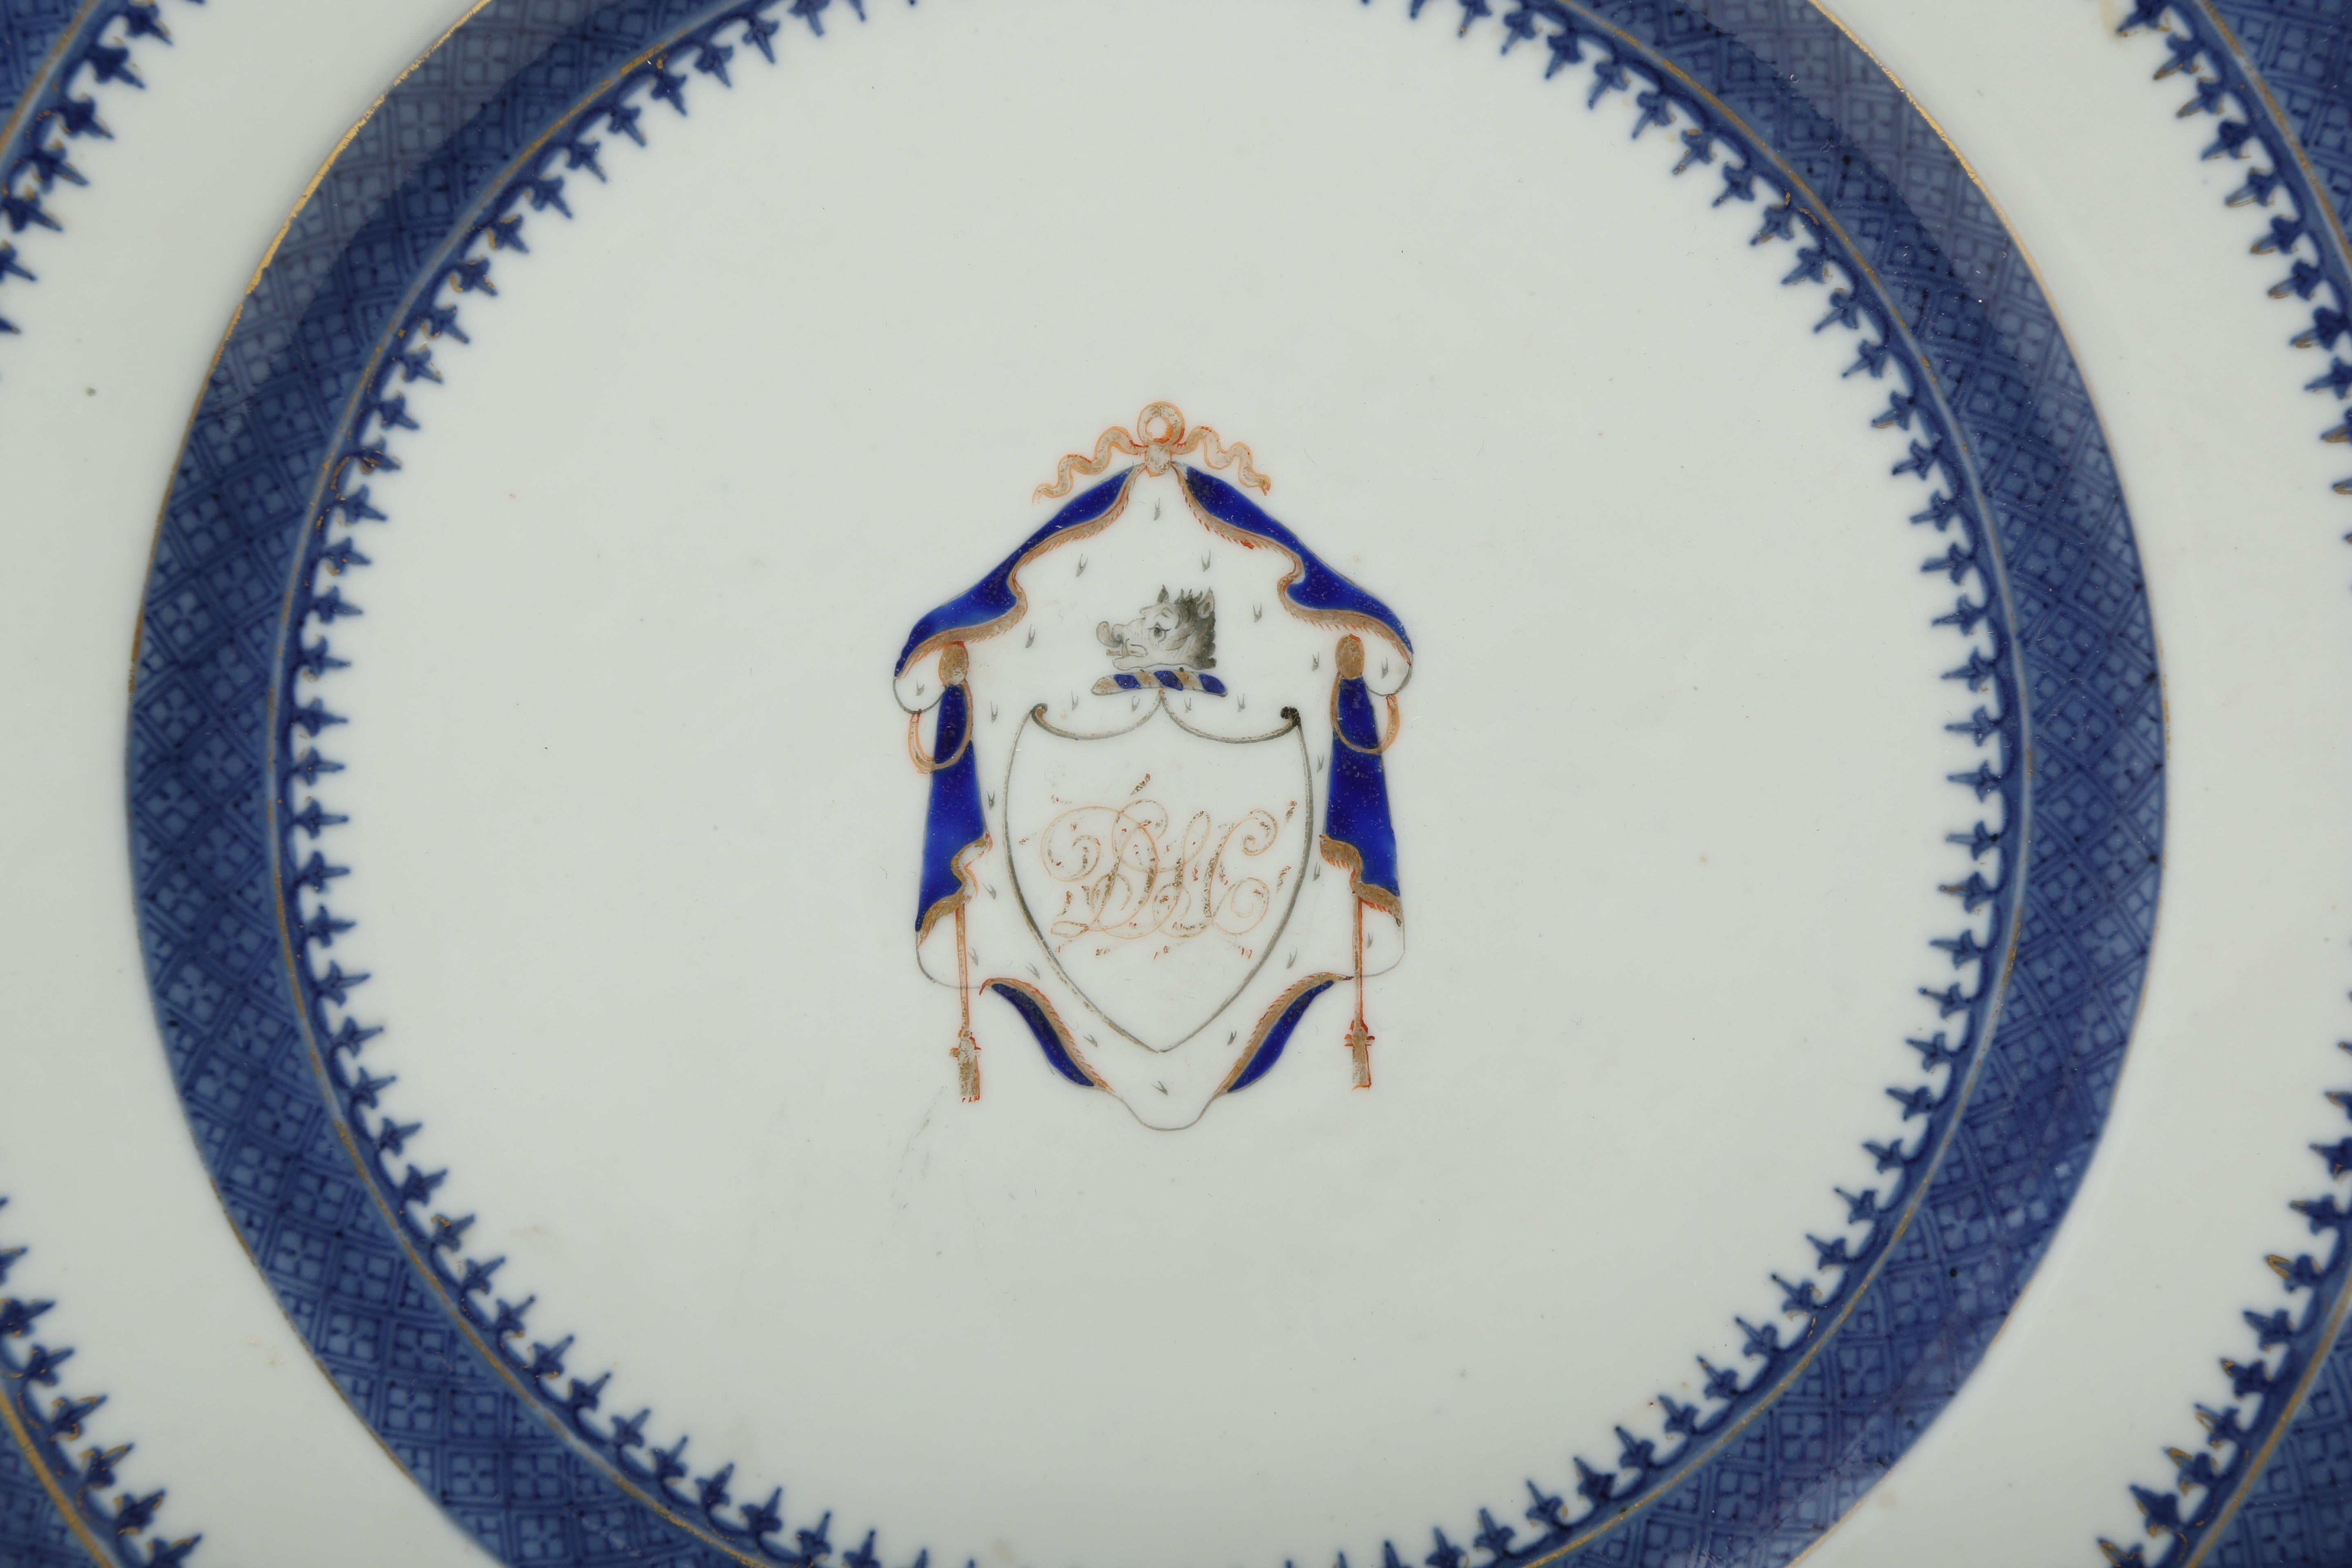 Chinese export porcelain armorial plate hand decorated in underglaze blue and overpainted with cobalt blue and gold enamel. In the center there is the crest with the initials D.L.C. under a boar's head surrounded by swagged drapes and topped with